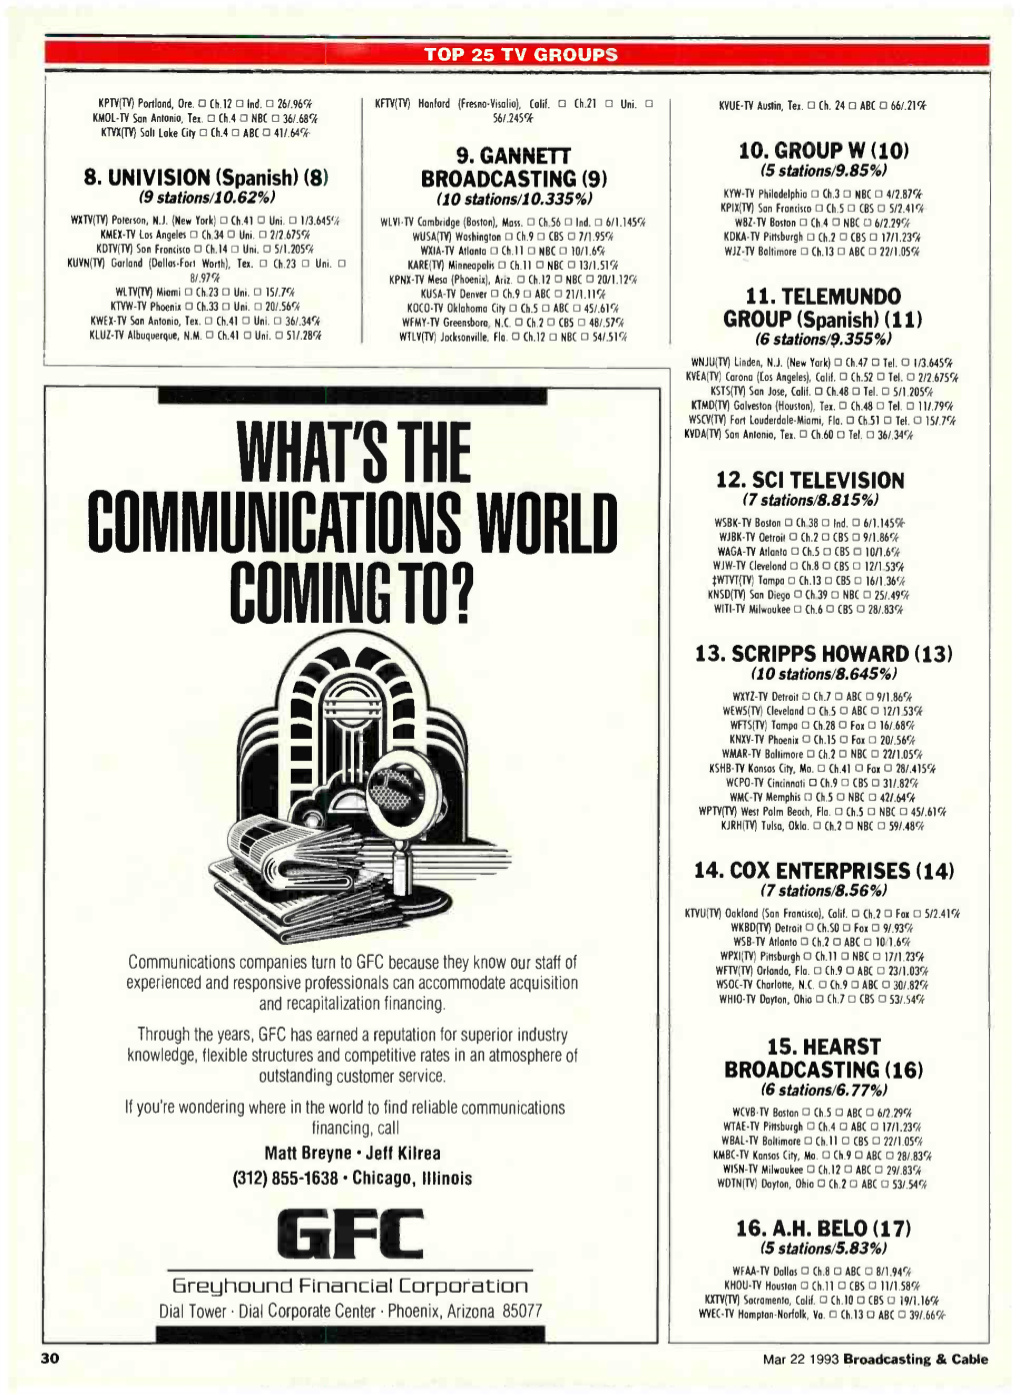 What's the Communications World Coming